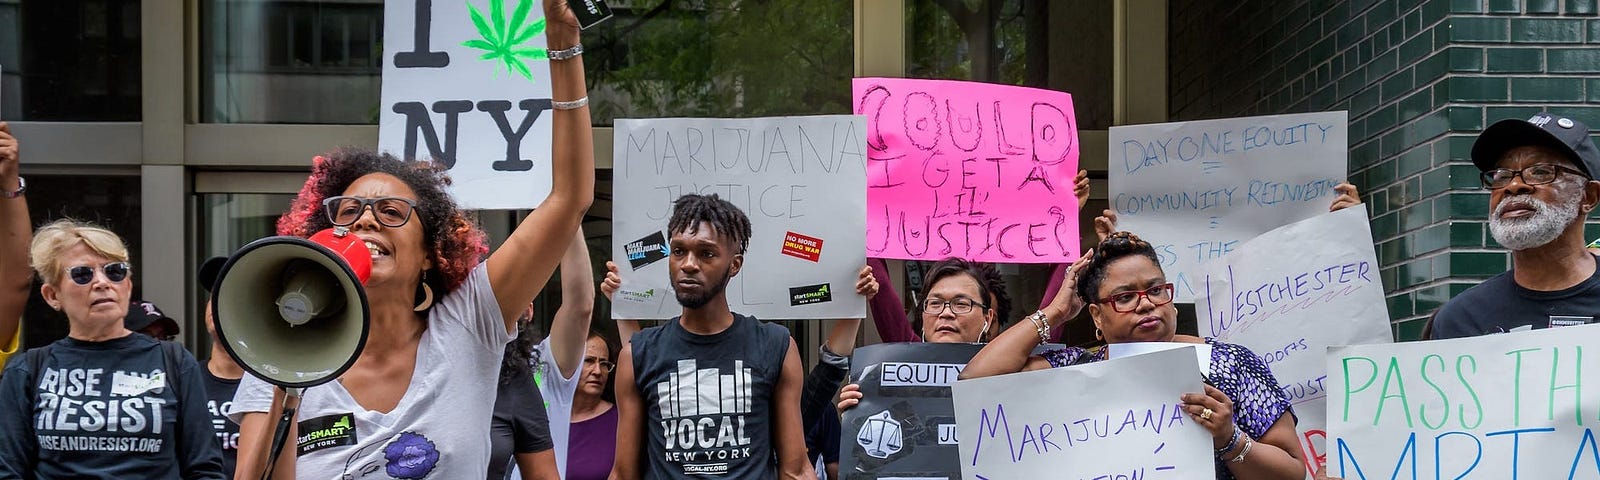 New York City residents at a protest for marijuana legalization in 2019.